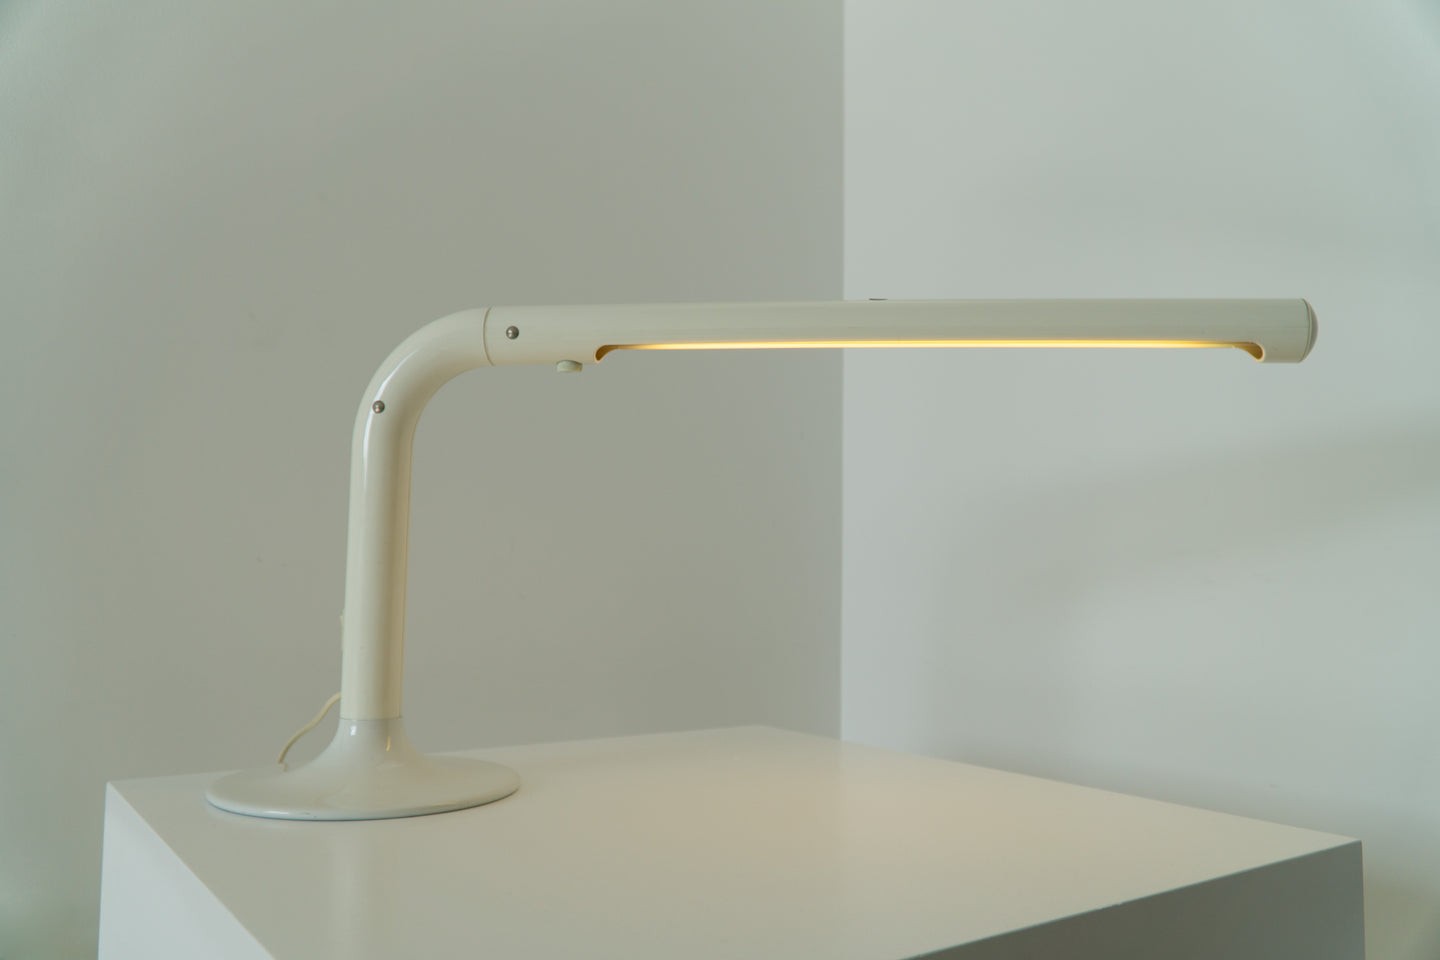 1970s Desk lamp ‘The Tube’ designed by Anders Pehrson for Ateljé Lyktan